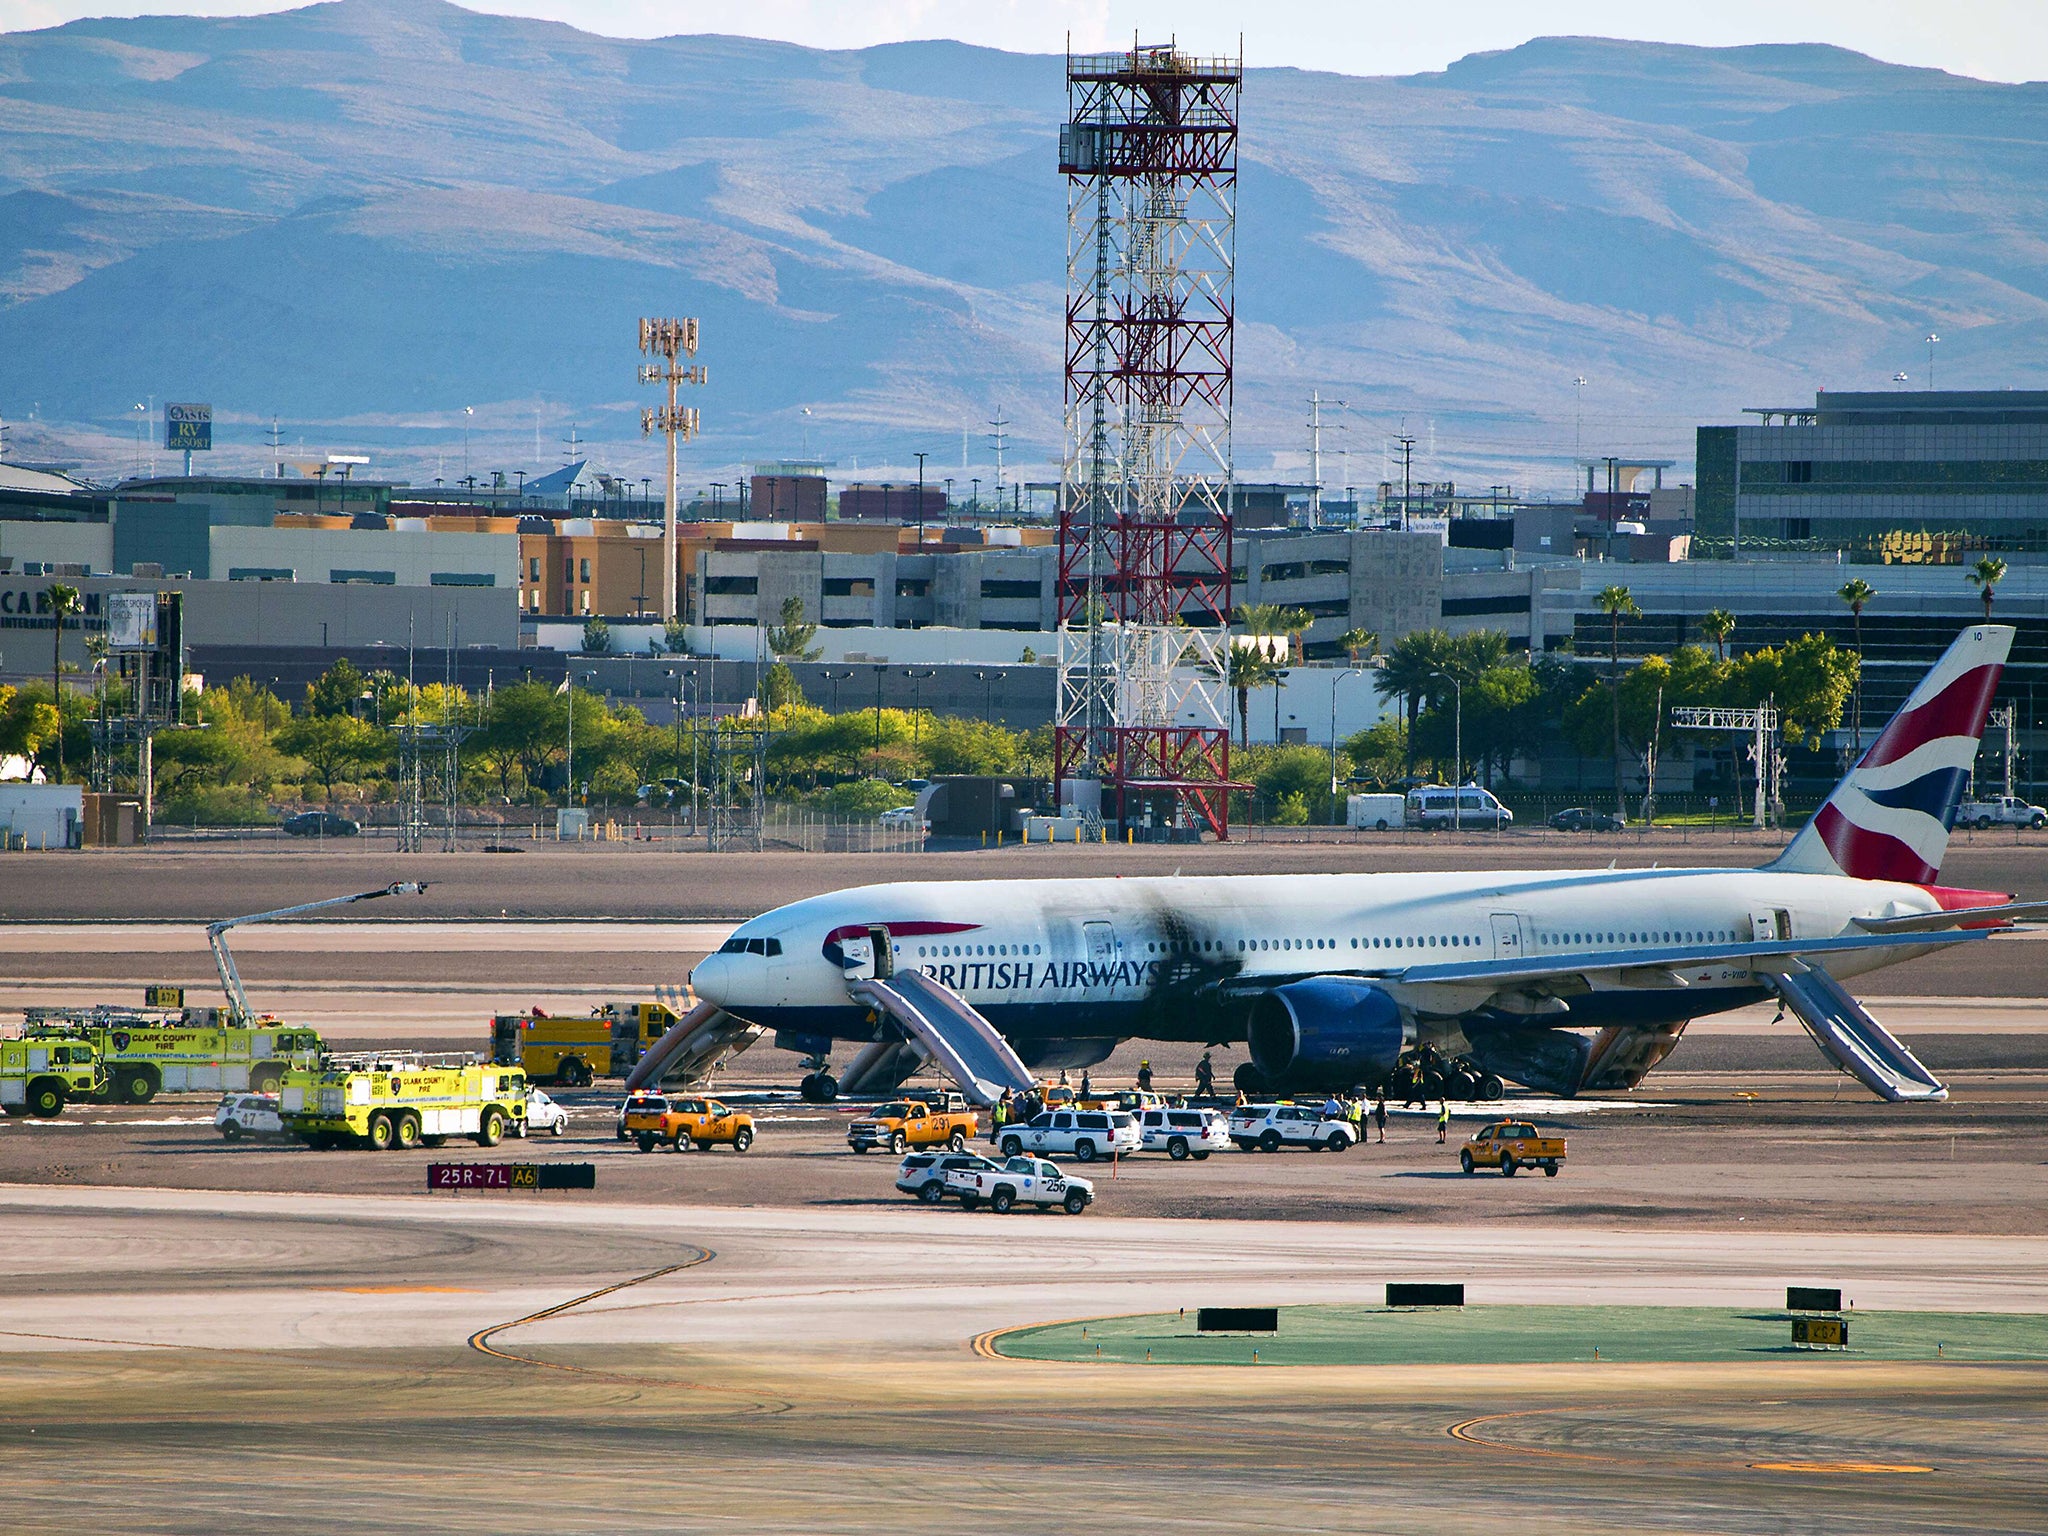 A British Airways jet caught fire at Las Vegas' airport, prompting the crew to abort takeoff and evacuate terrified passengers. Seven people on board the London-bound flight were treated for minor injuries